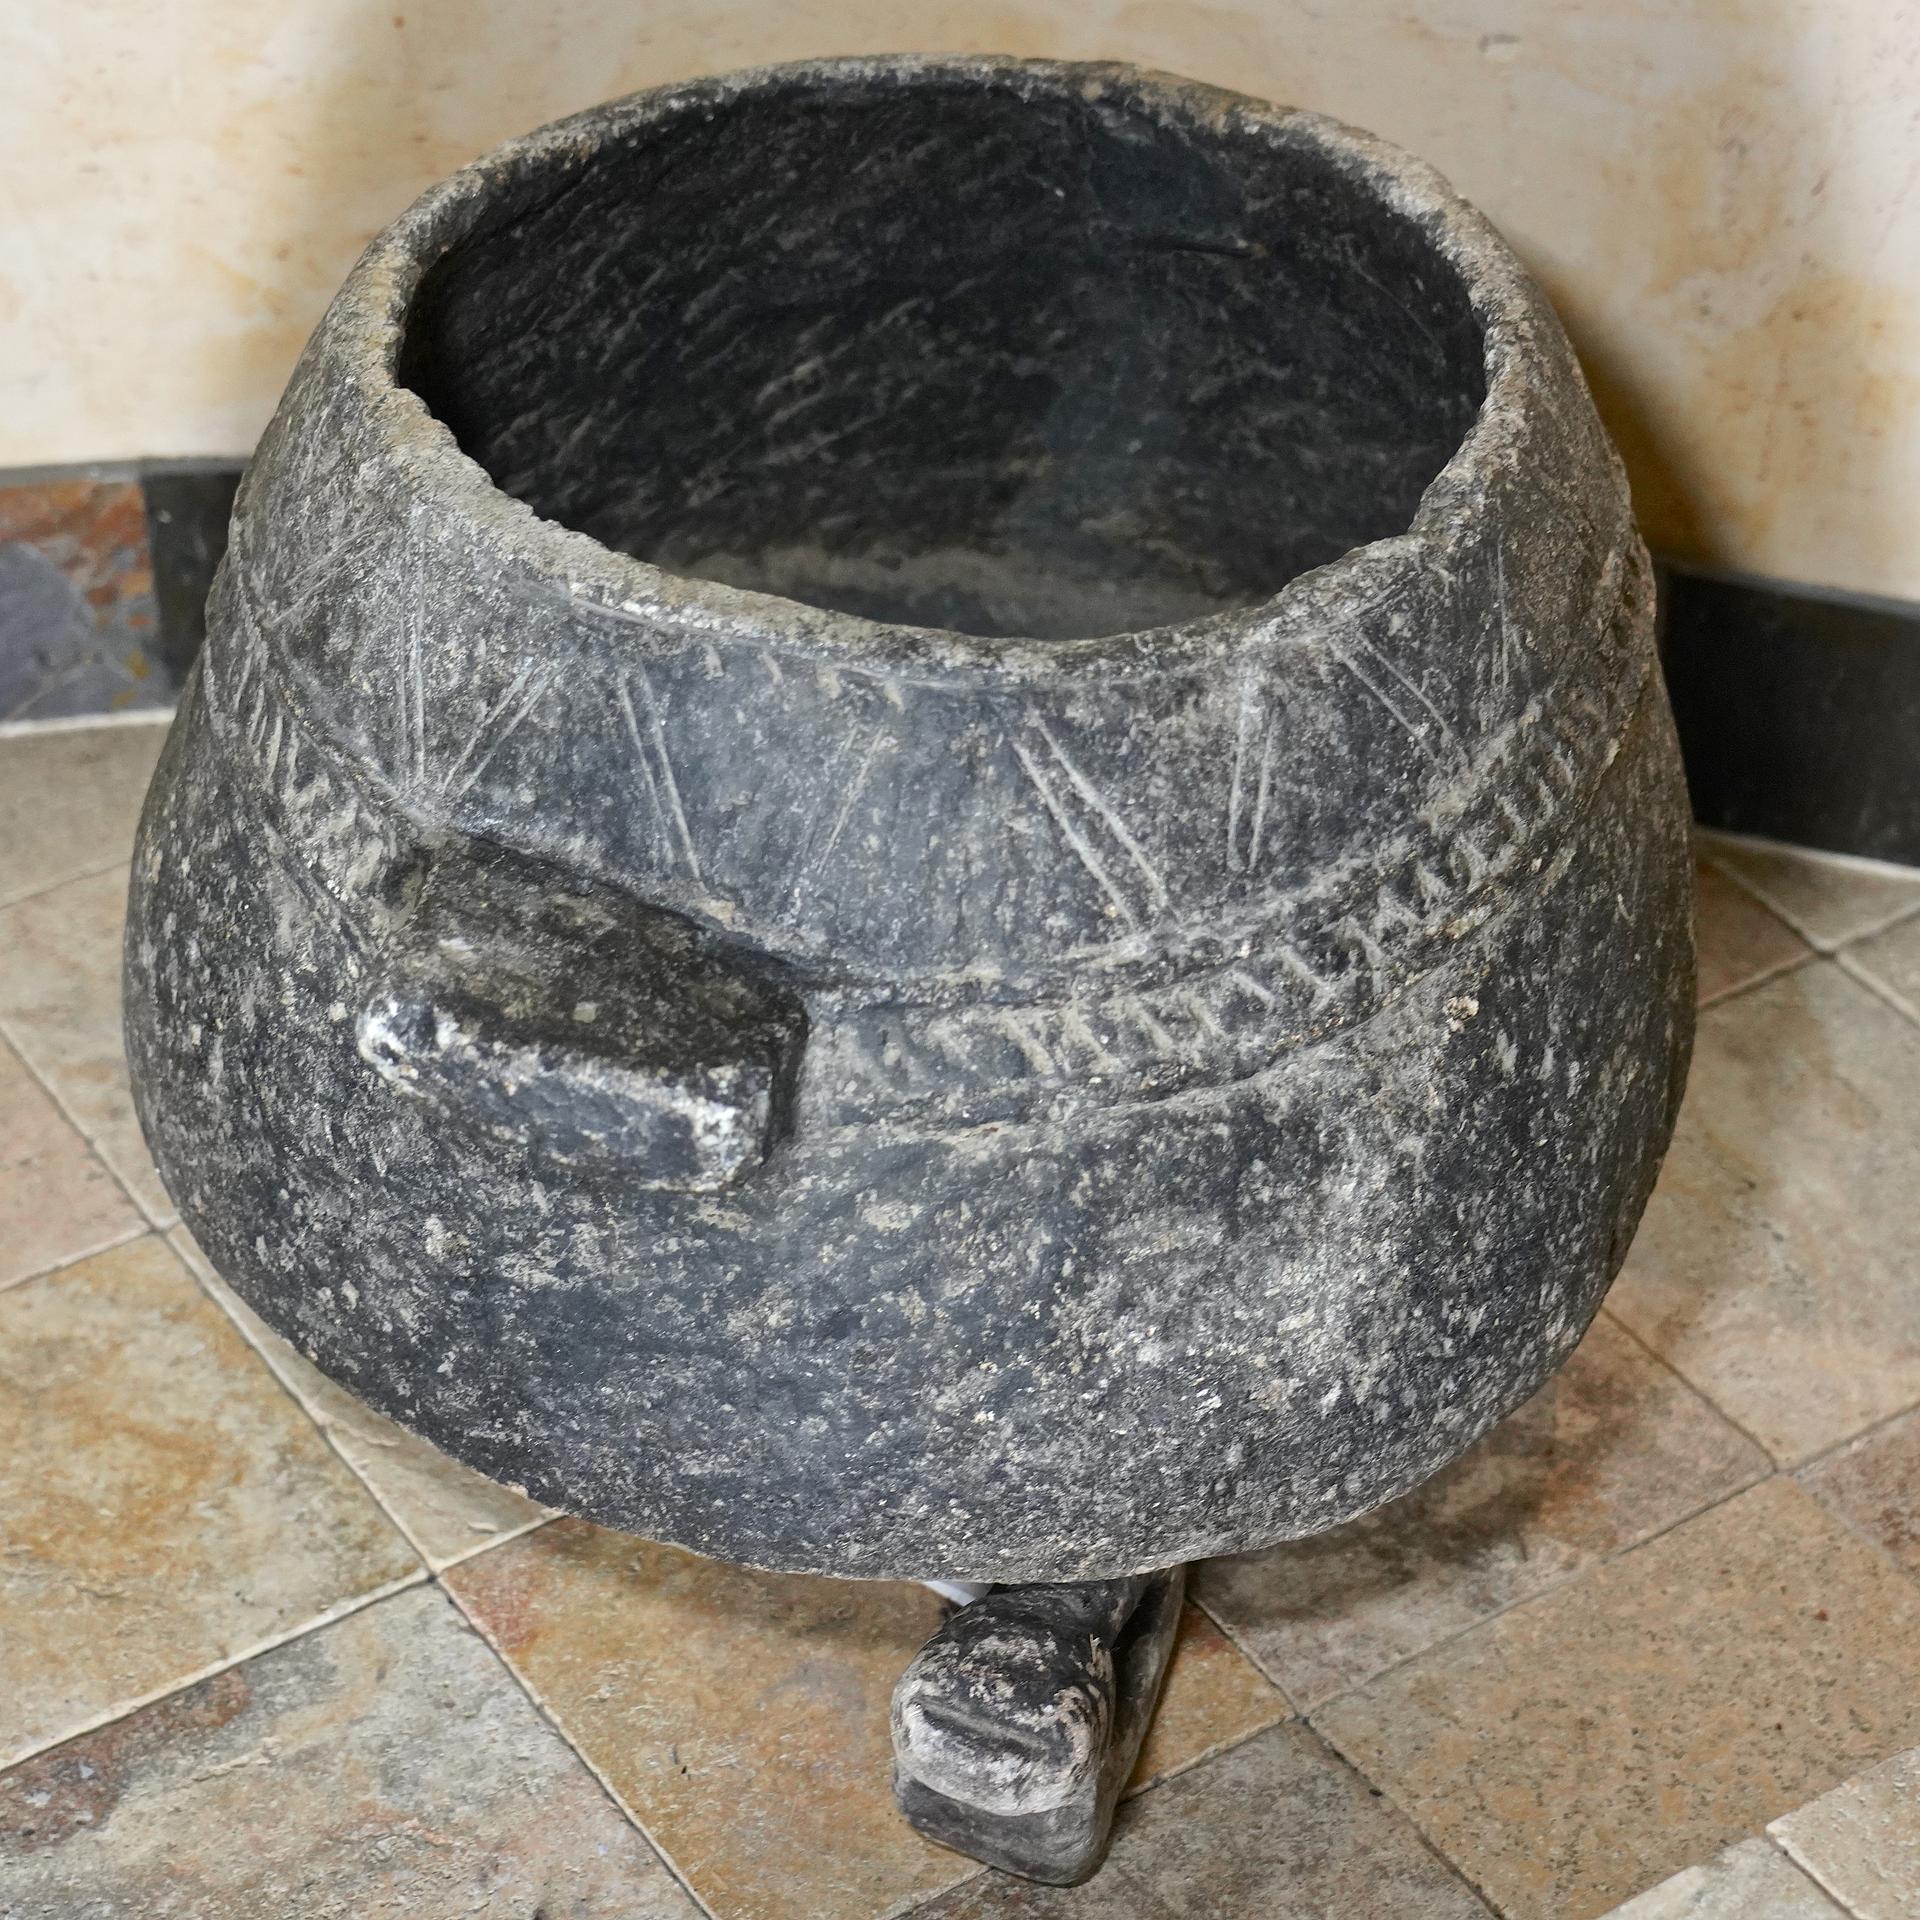 Small stone cooking pot (14.04.2032) - Ethnic Design - Collection Reto  Zehnder